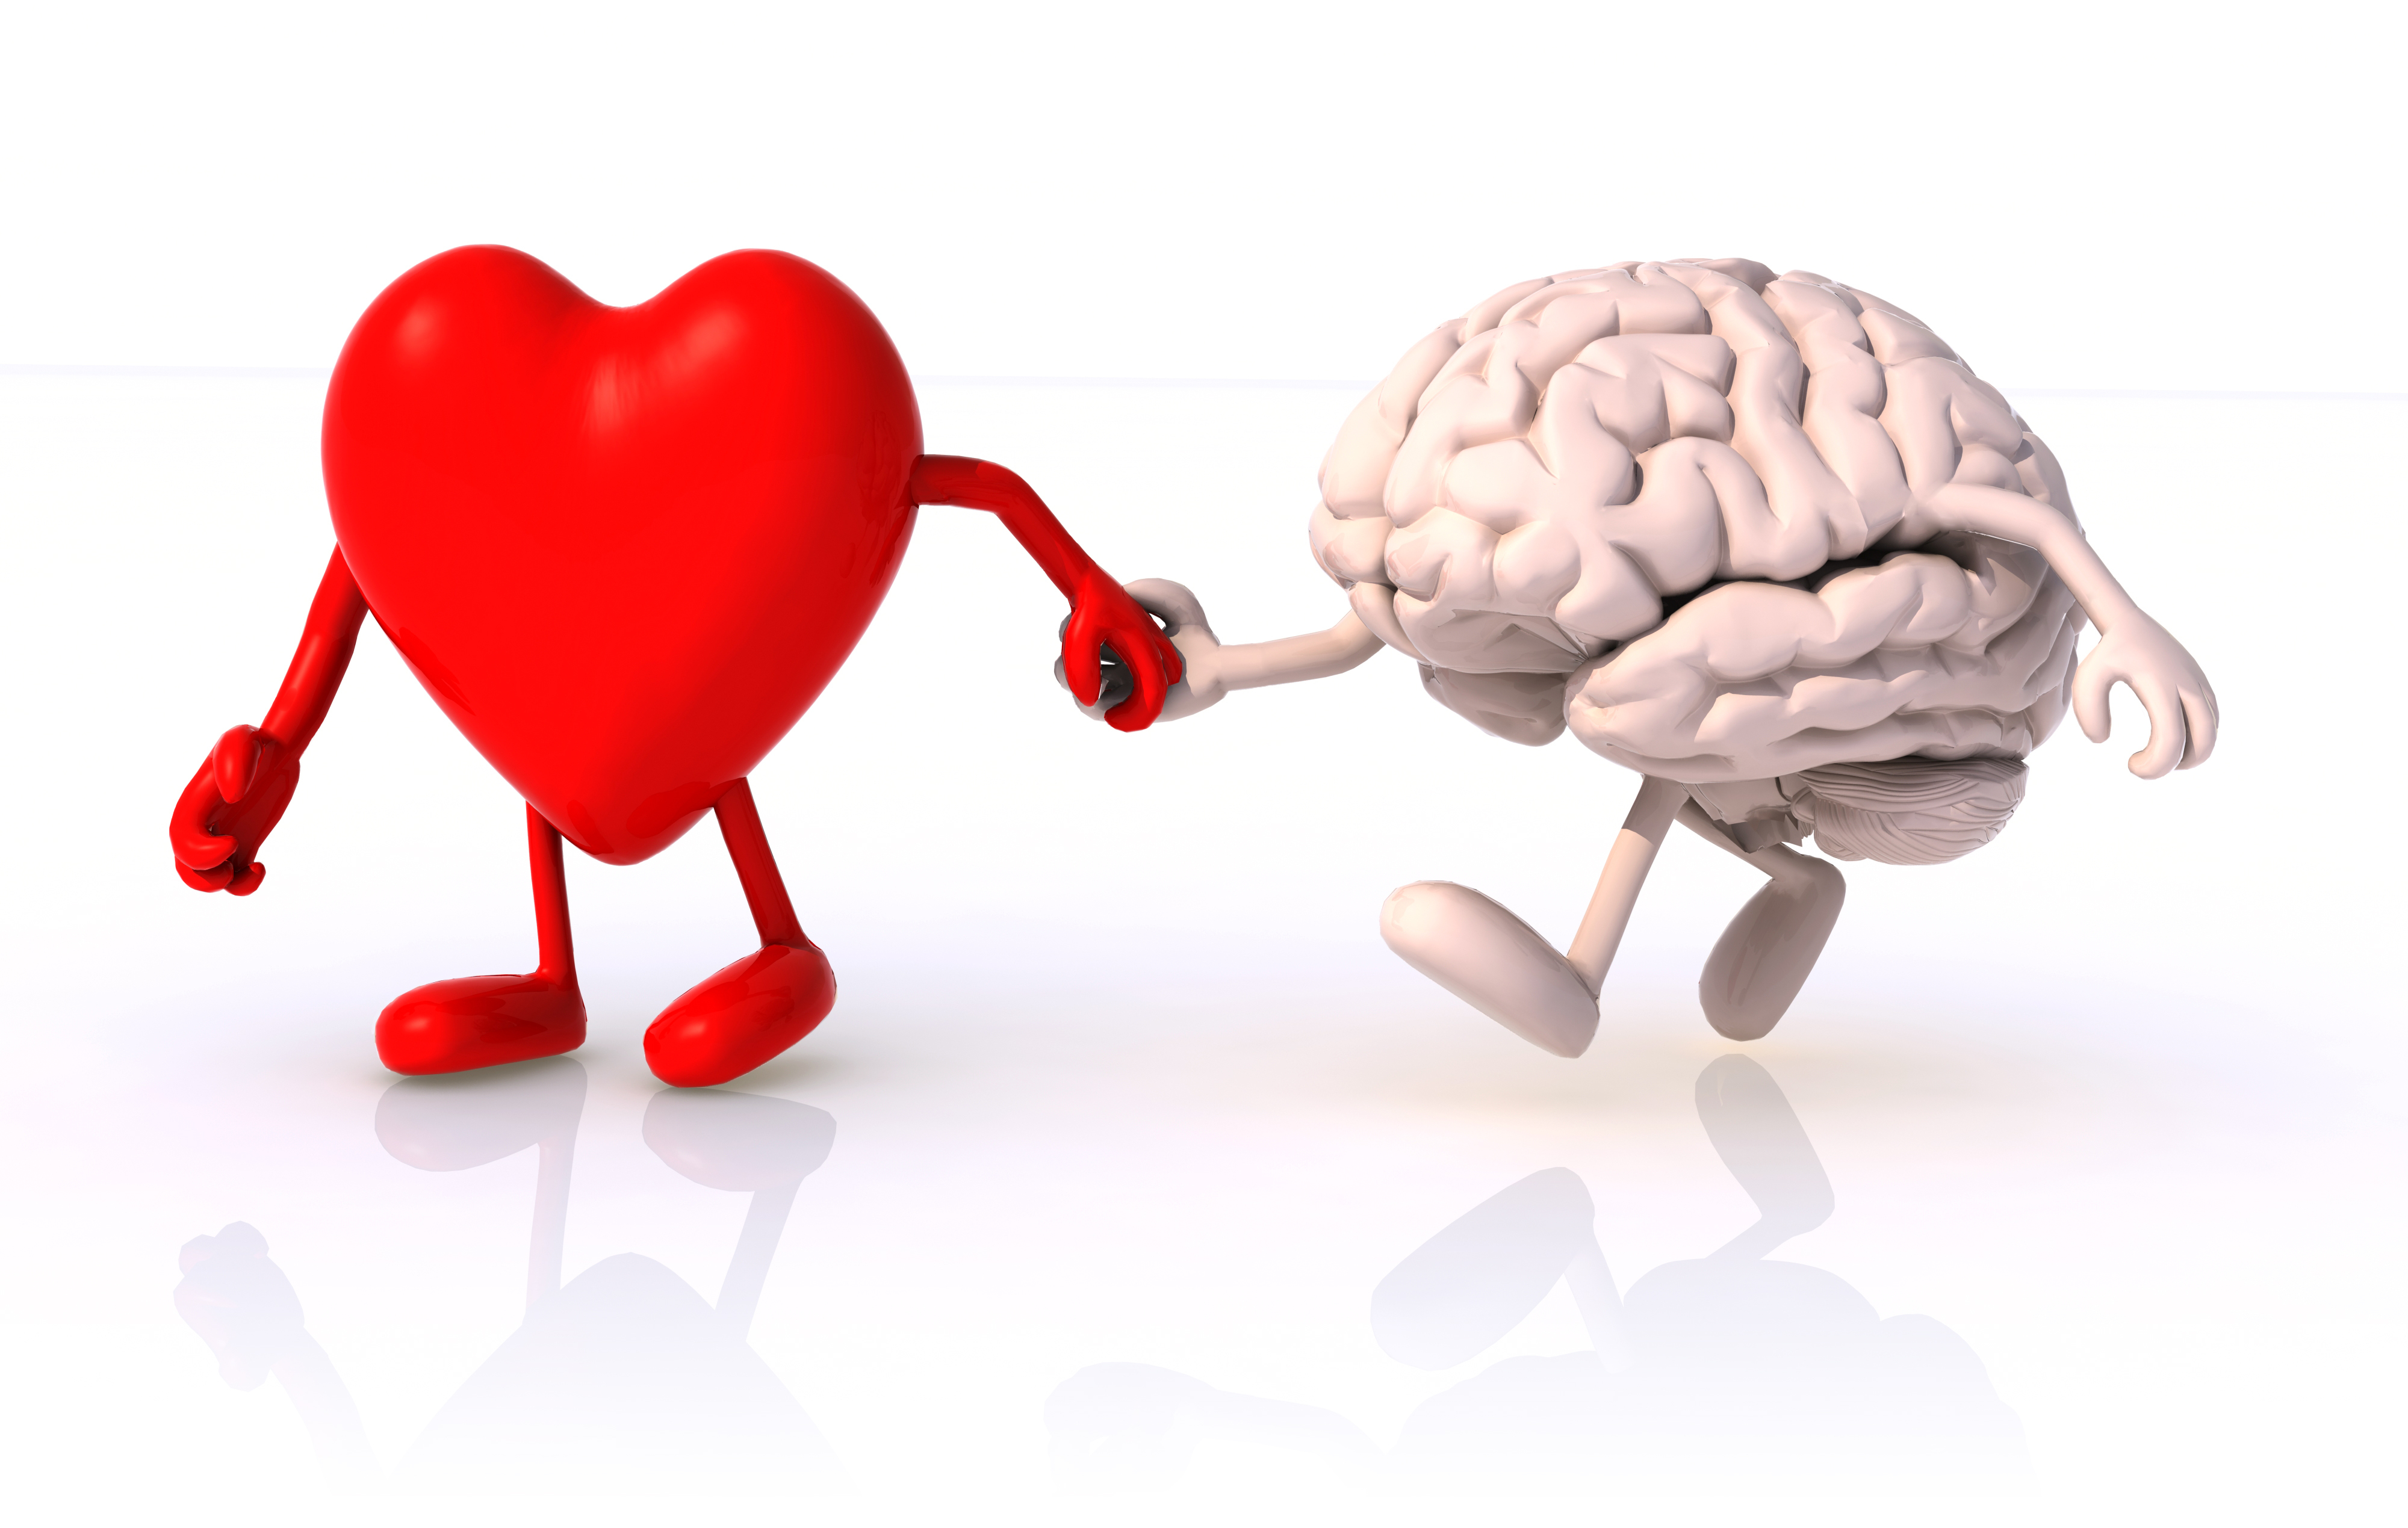 A cartoon heart holds the hand of a cartoon brain, guiding it forward as if to suggest a positive relationship between the two.